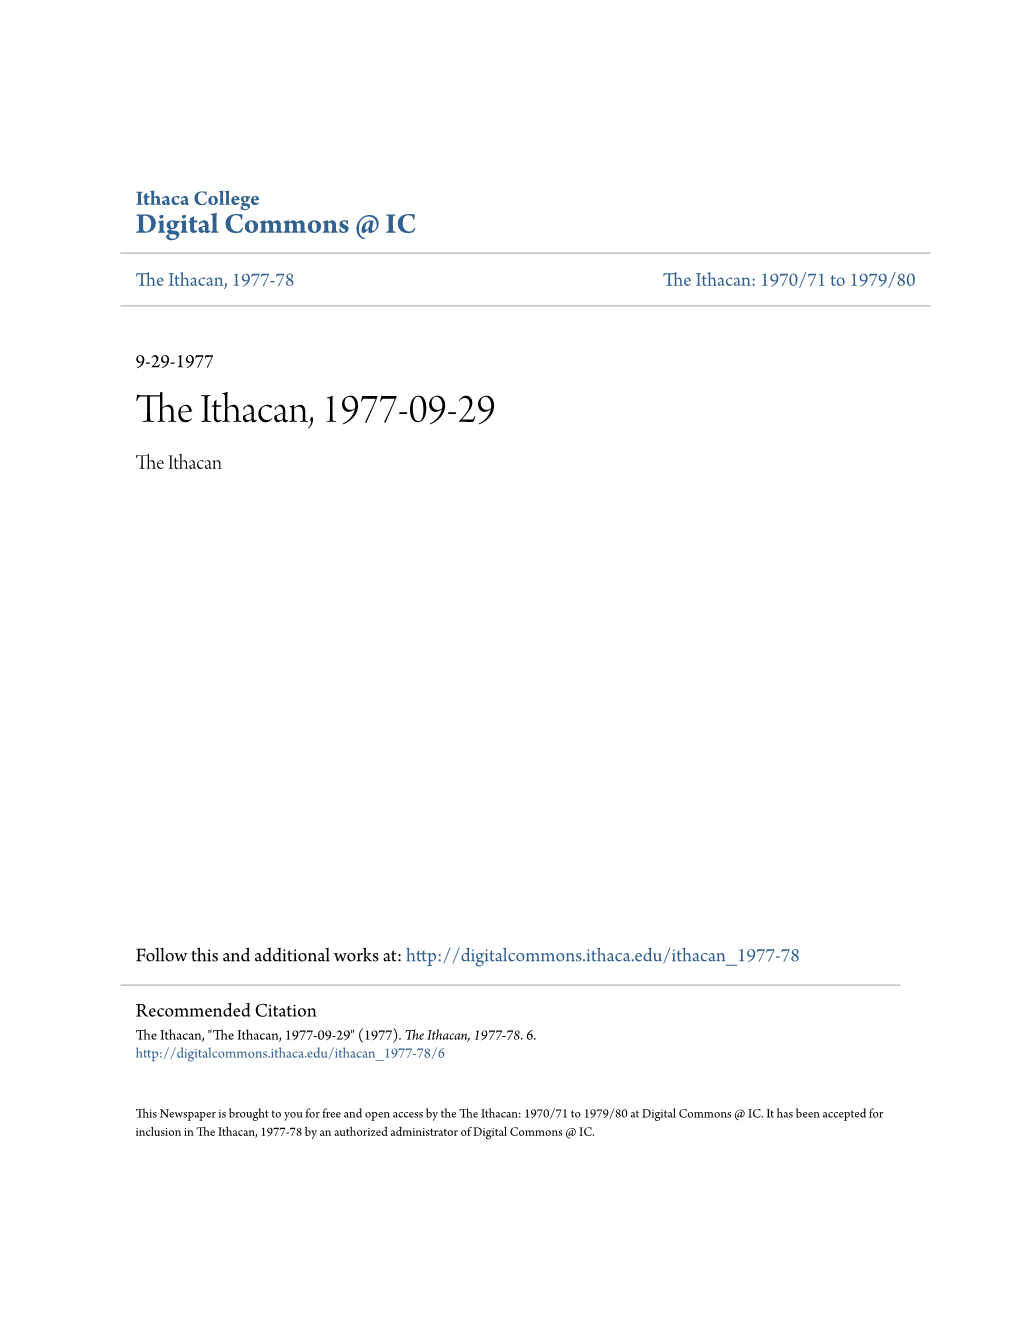 The Ithacan, 1977-09-29